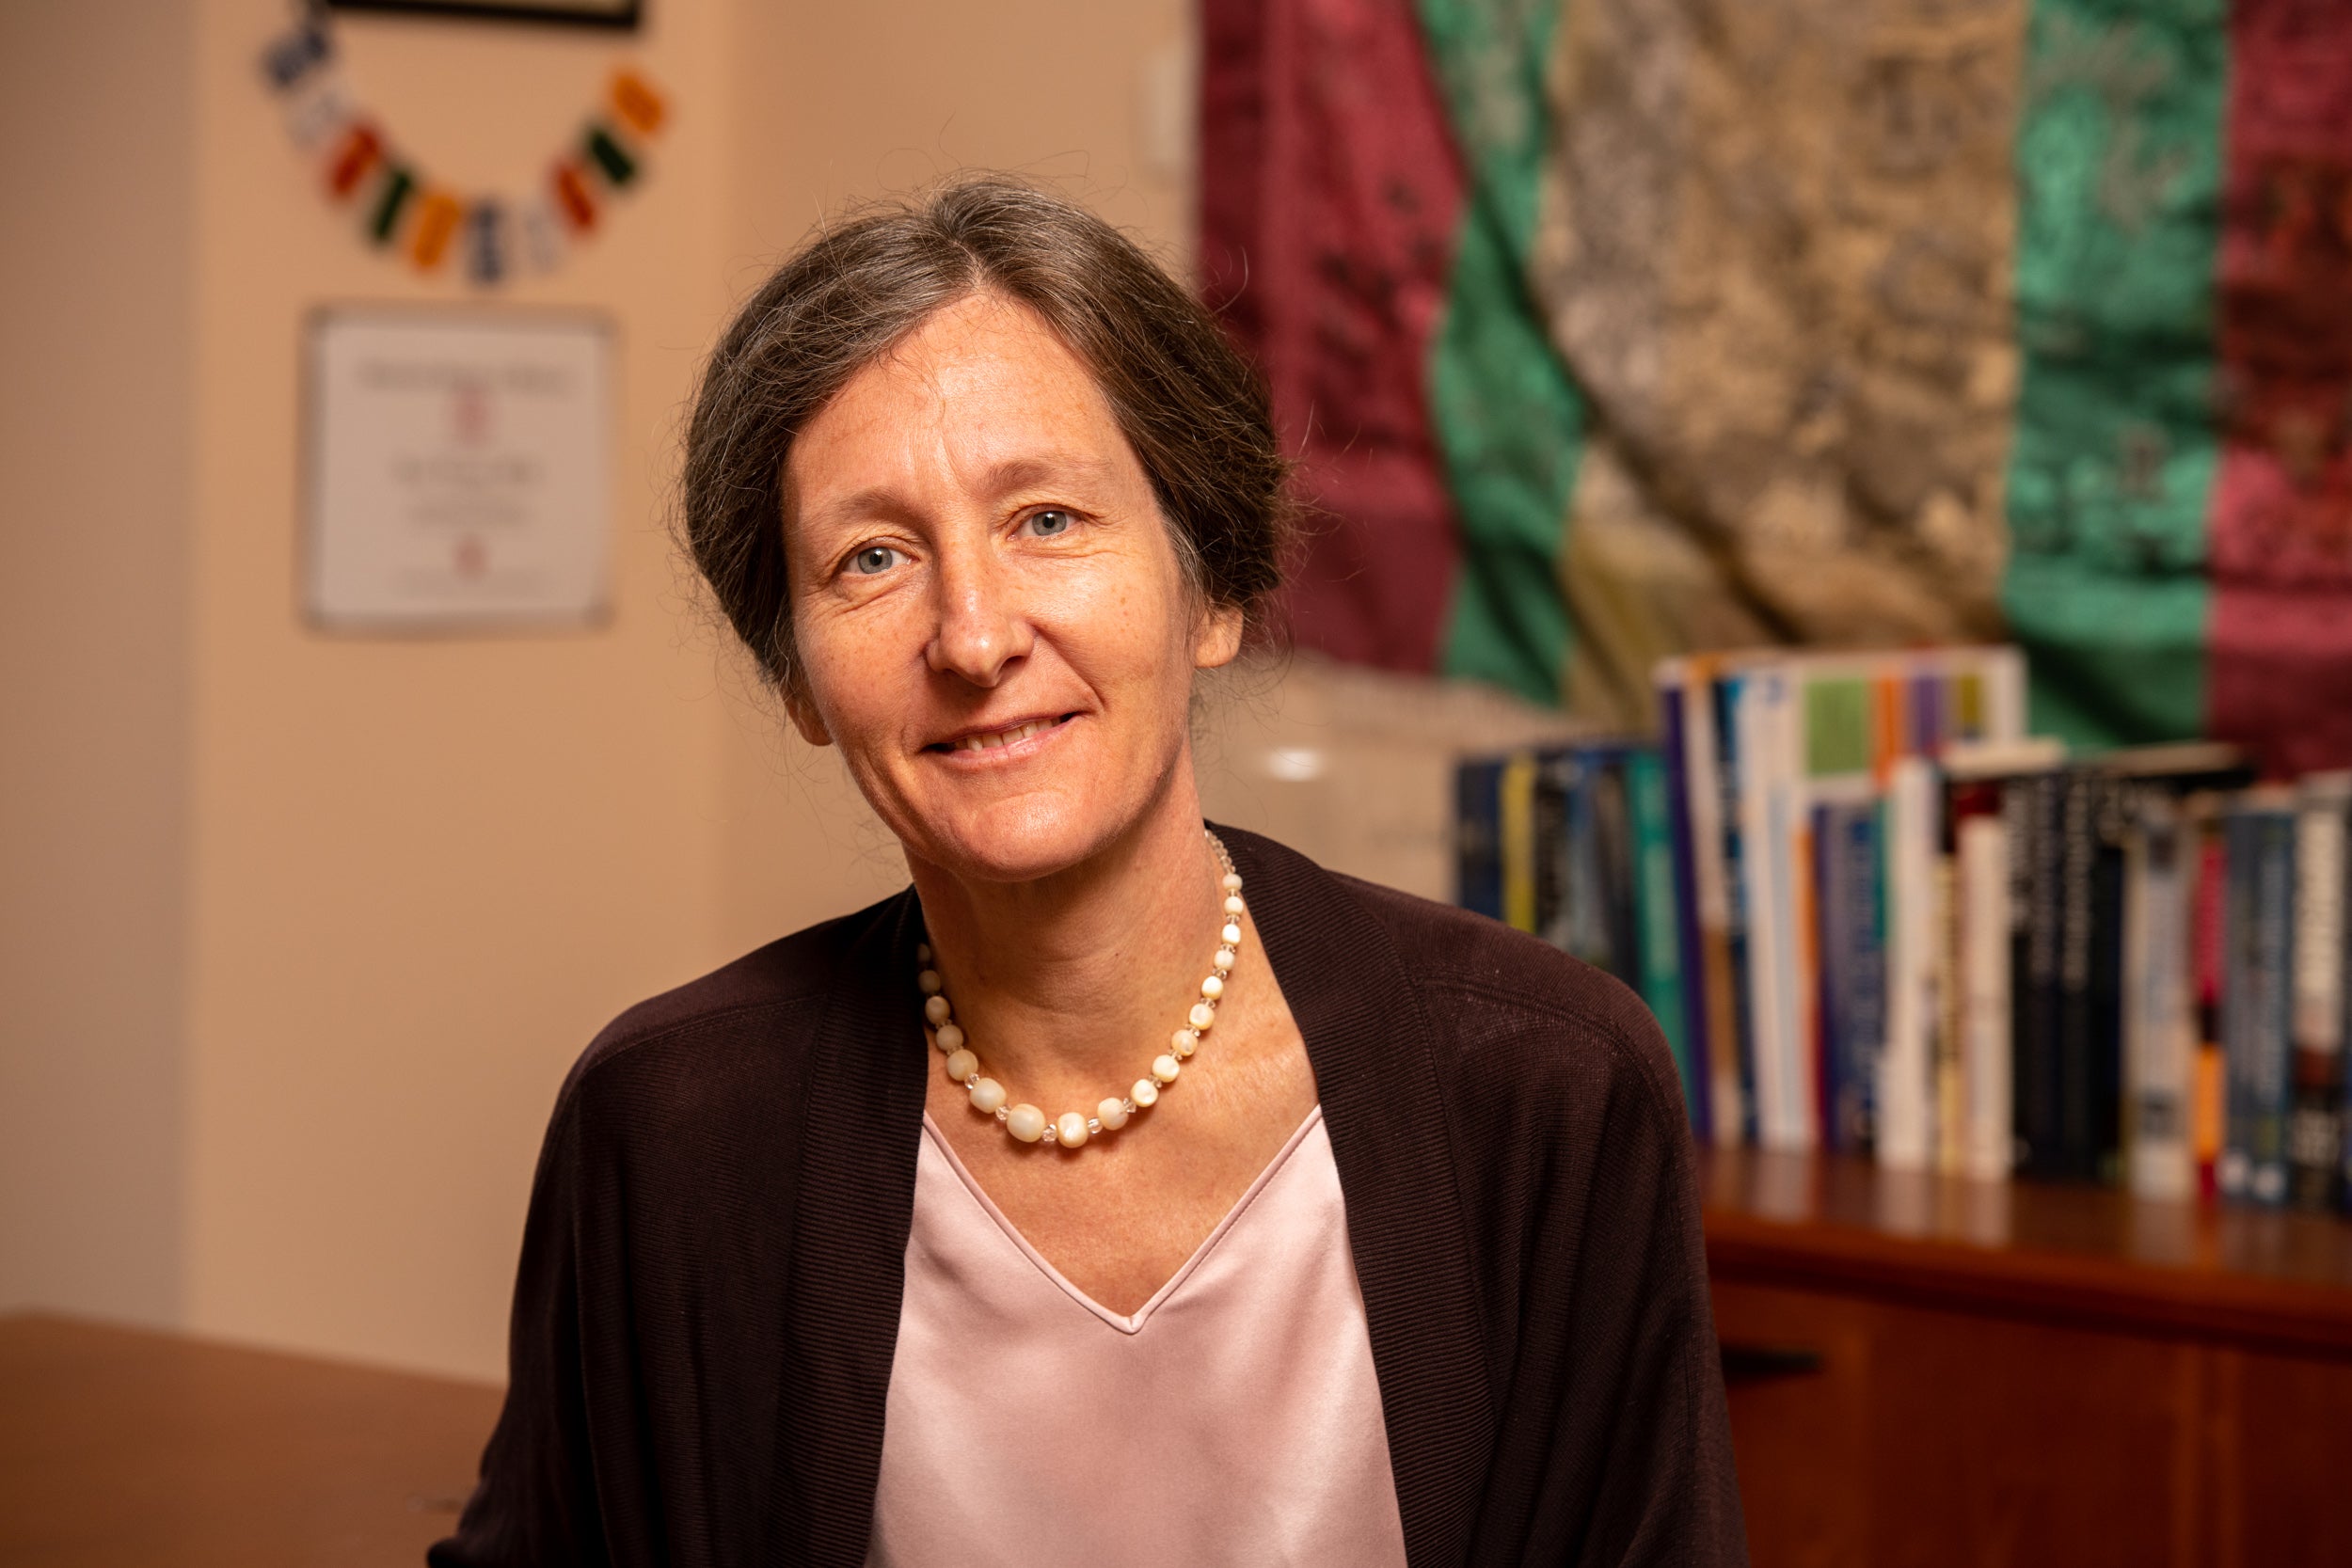 Dr. Anna Lembke, Professor and Clinician Scholar of Psychiatry and Addiction